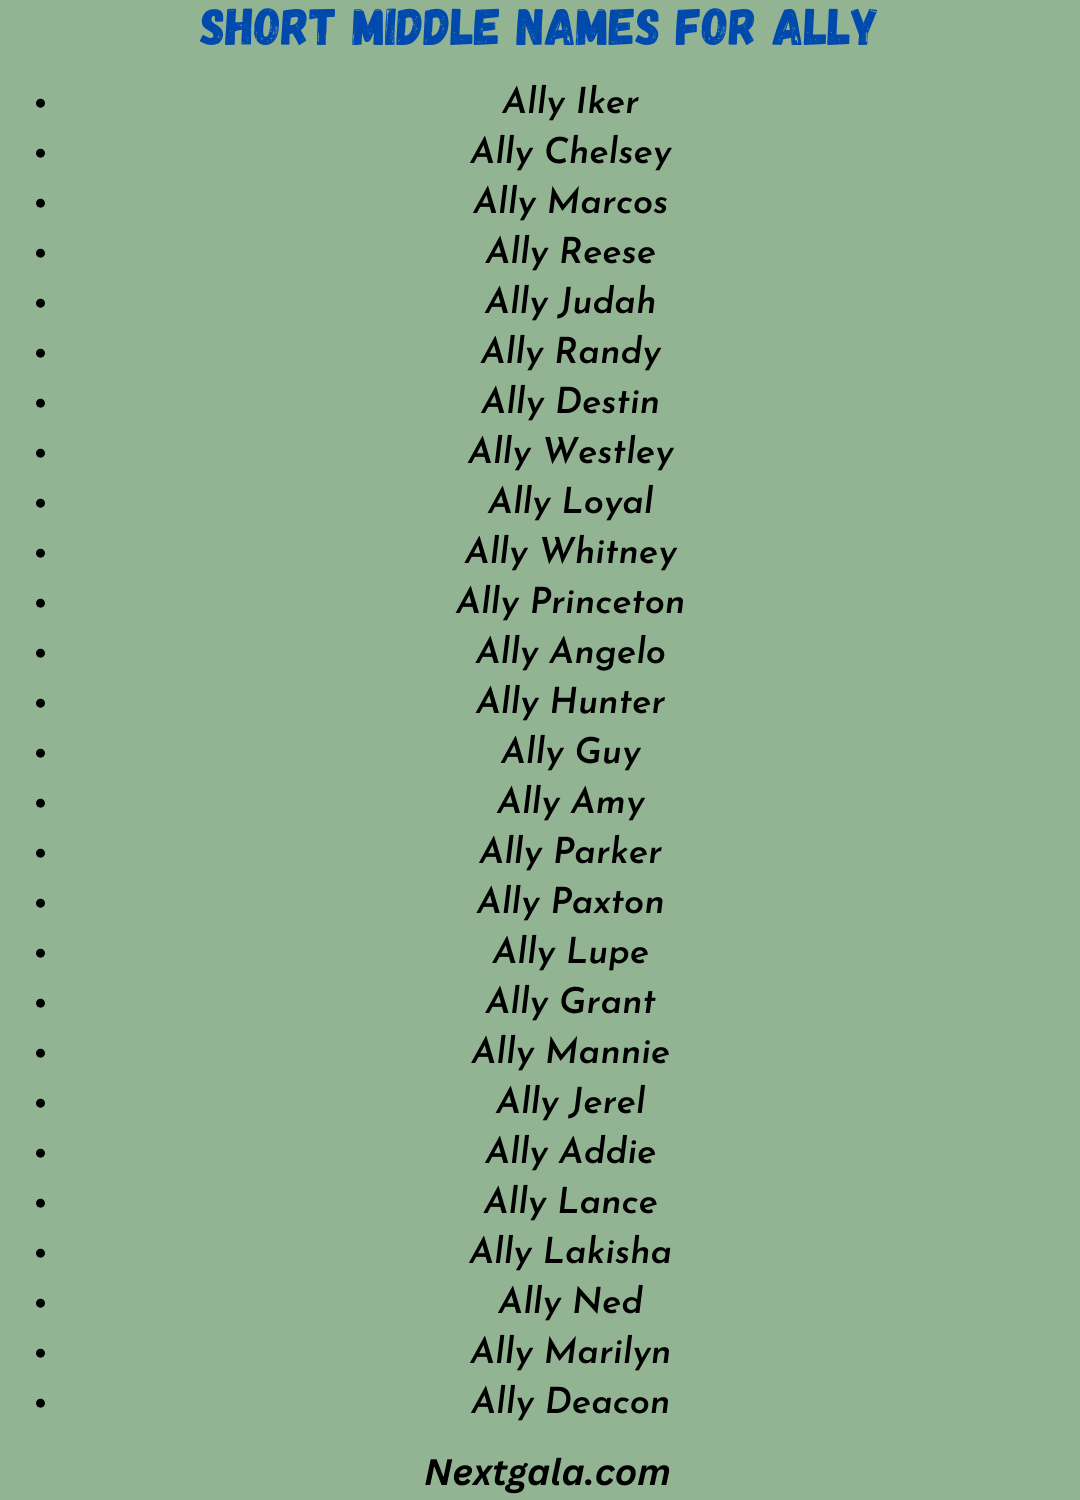 Short Middle Names for Ally